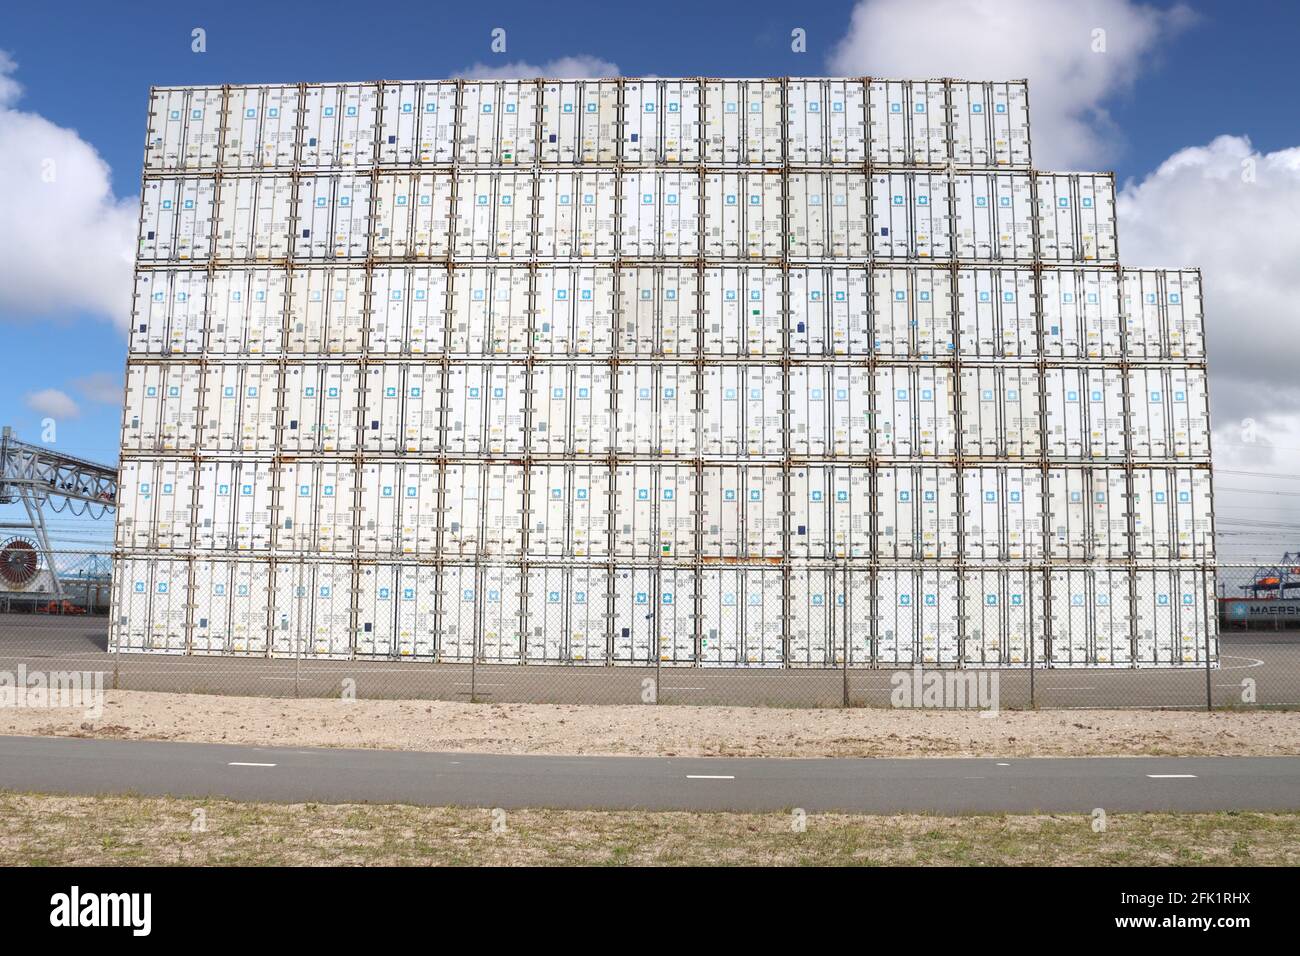 Maersk Sea containers stacked on top of each other in the Maasvlakte harbor in the port of Rotterdam Stock Photo